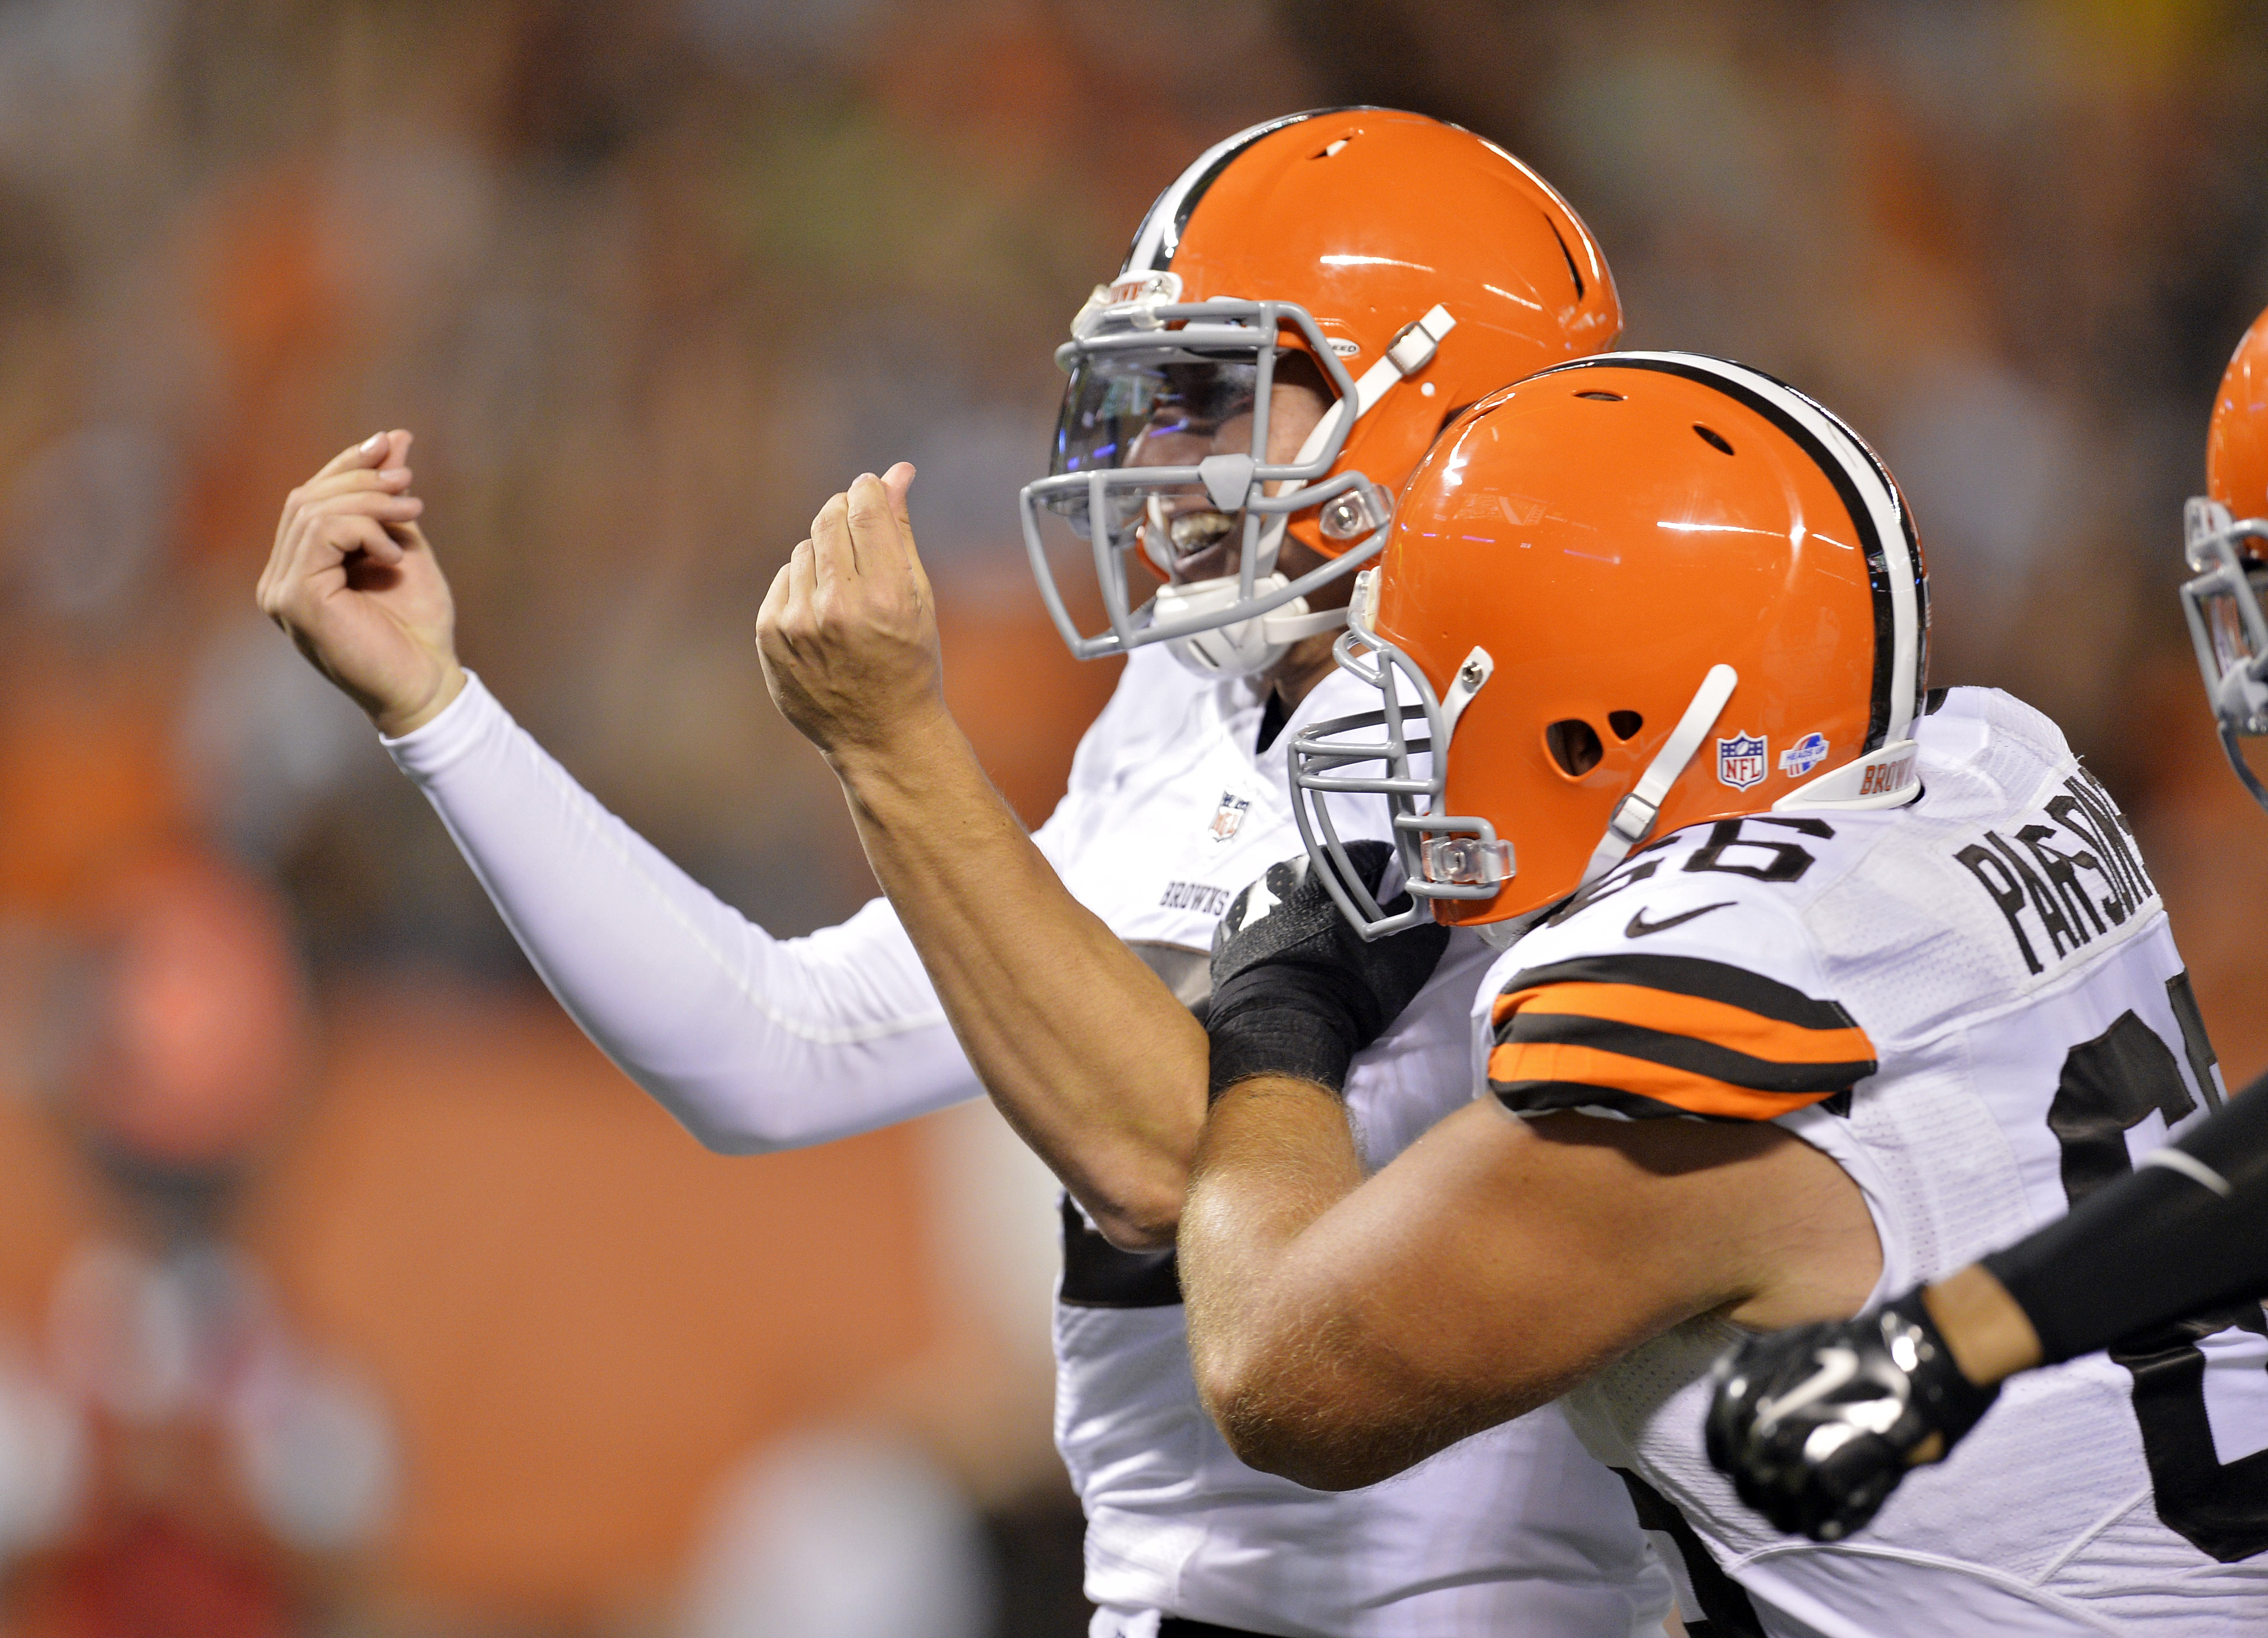 The Cleveland fans' choice: Johnny Manziel over Jim Brown